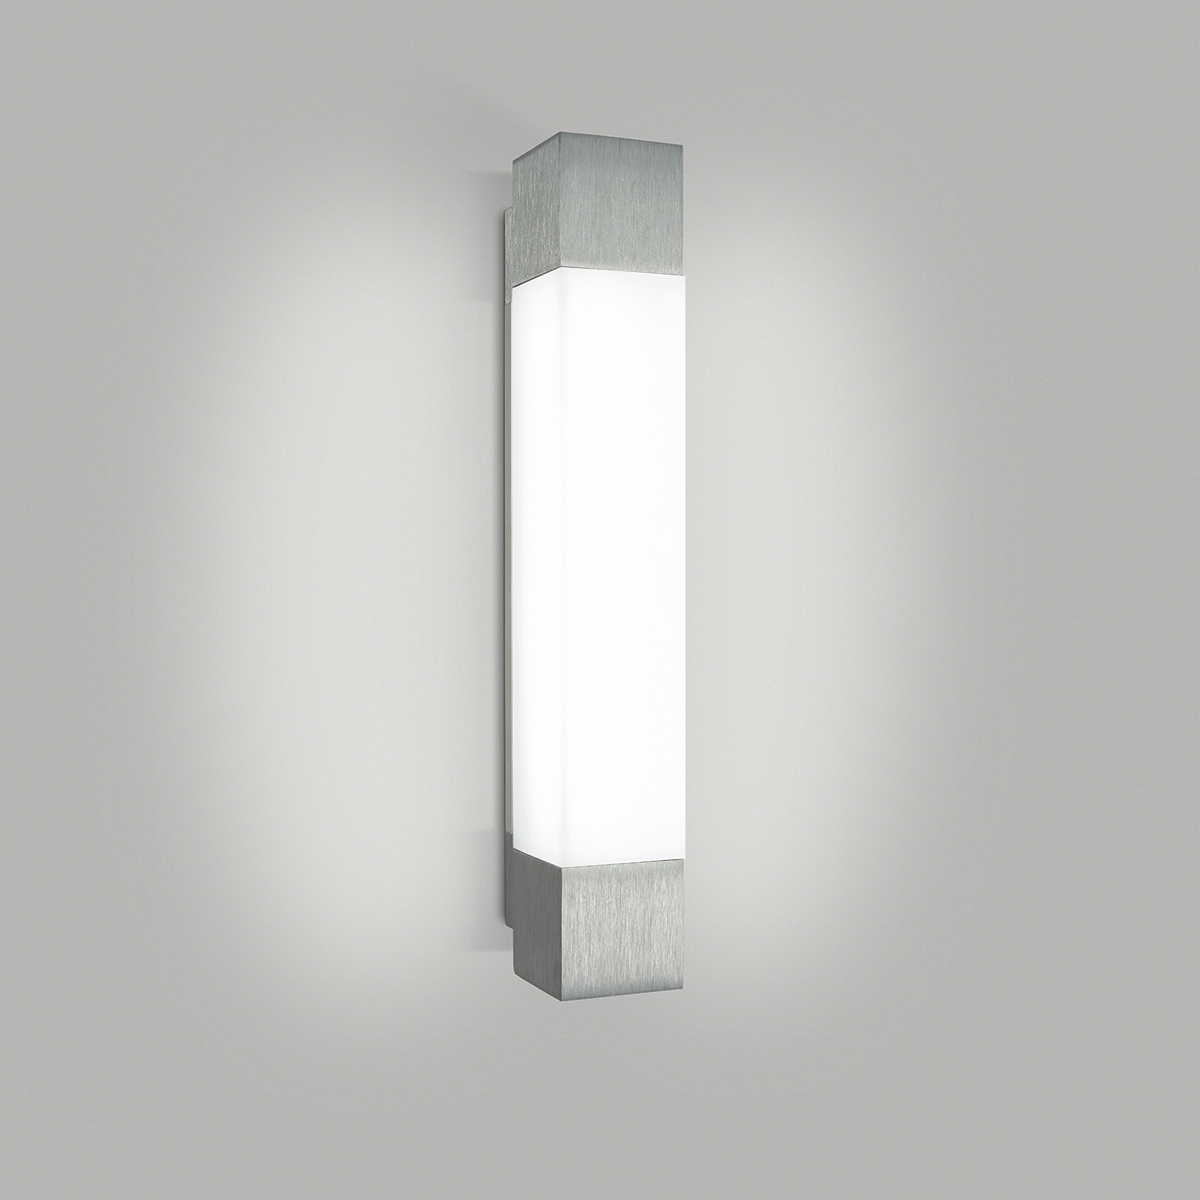 A luminous rectangular wall sconce with solid end caps